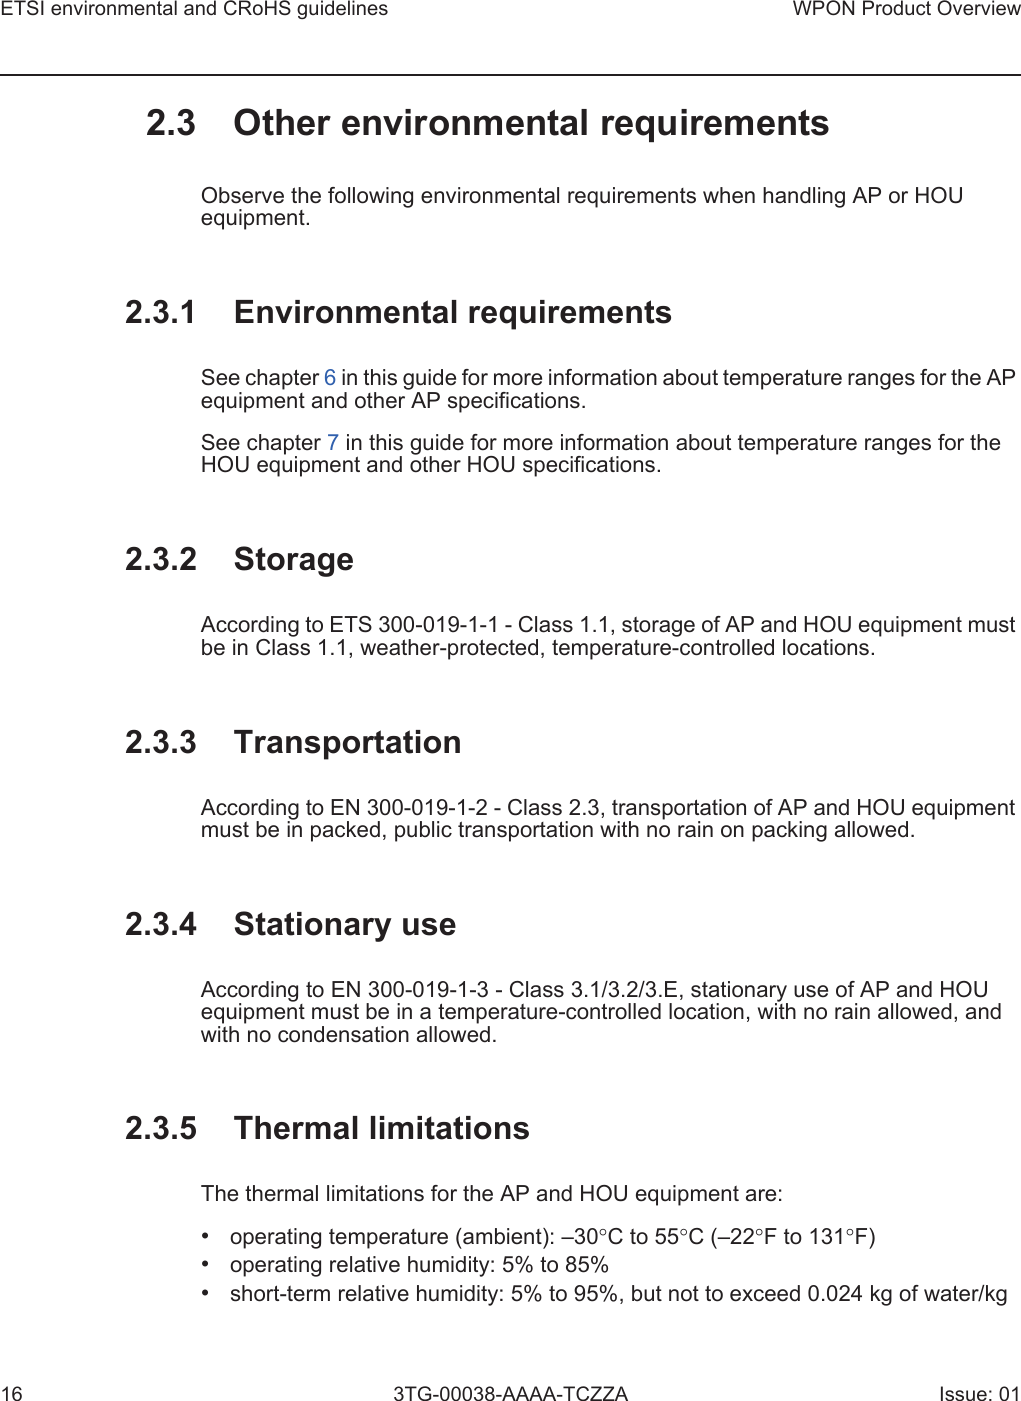 ETSI environmental and CRoHS guidelines16WPON Product Overview3TG-00038-AAAA-TCZZA Issue: 012.3 Other environmental requirementsObserve the following environmental requirements when handling AP or HOU equipment.2.3.1 Environmental requirementsSee chapter 6 in this guide for more information about temperature ranges for the AP equipment and other AP specifications. See chapter 7 in this guide for more information about temperature ranges for the HOU equipment and other HOU specifications. 2.3.2 StorageAccording to ETS 300-019-1-1 - Class 1.1, storage of AP and HOU equipment must be in Class 1.1, weather-protected, temperature-controlled locations. 2.3.3 TransportationAccording to EN 300-019-1-2 - Class 2.3, transportation of AP and HOU equipment must be in packed, public transportation with no rain on packing allowed.2.3.4 Stationary useAccording to EN 300-019-1-3 - Class 3.1/3.2/3.E, stationary use of AP and HOU equipment must be in a temperature-controlled location, with no rain allowed, and with no condensation allowed. 2.3.5 Thermal limitationsThe thermal limitations for the AP and HOU equipment are: •operating temperature (ambient): –30°C to 55°C (–22°F to 131°F)•operating relative humidity: 5% to 85%•short-term relative humidity: 5% to 95%, but not to exceed 0.024 kg of water/kg